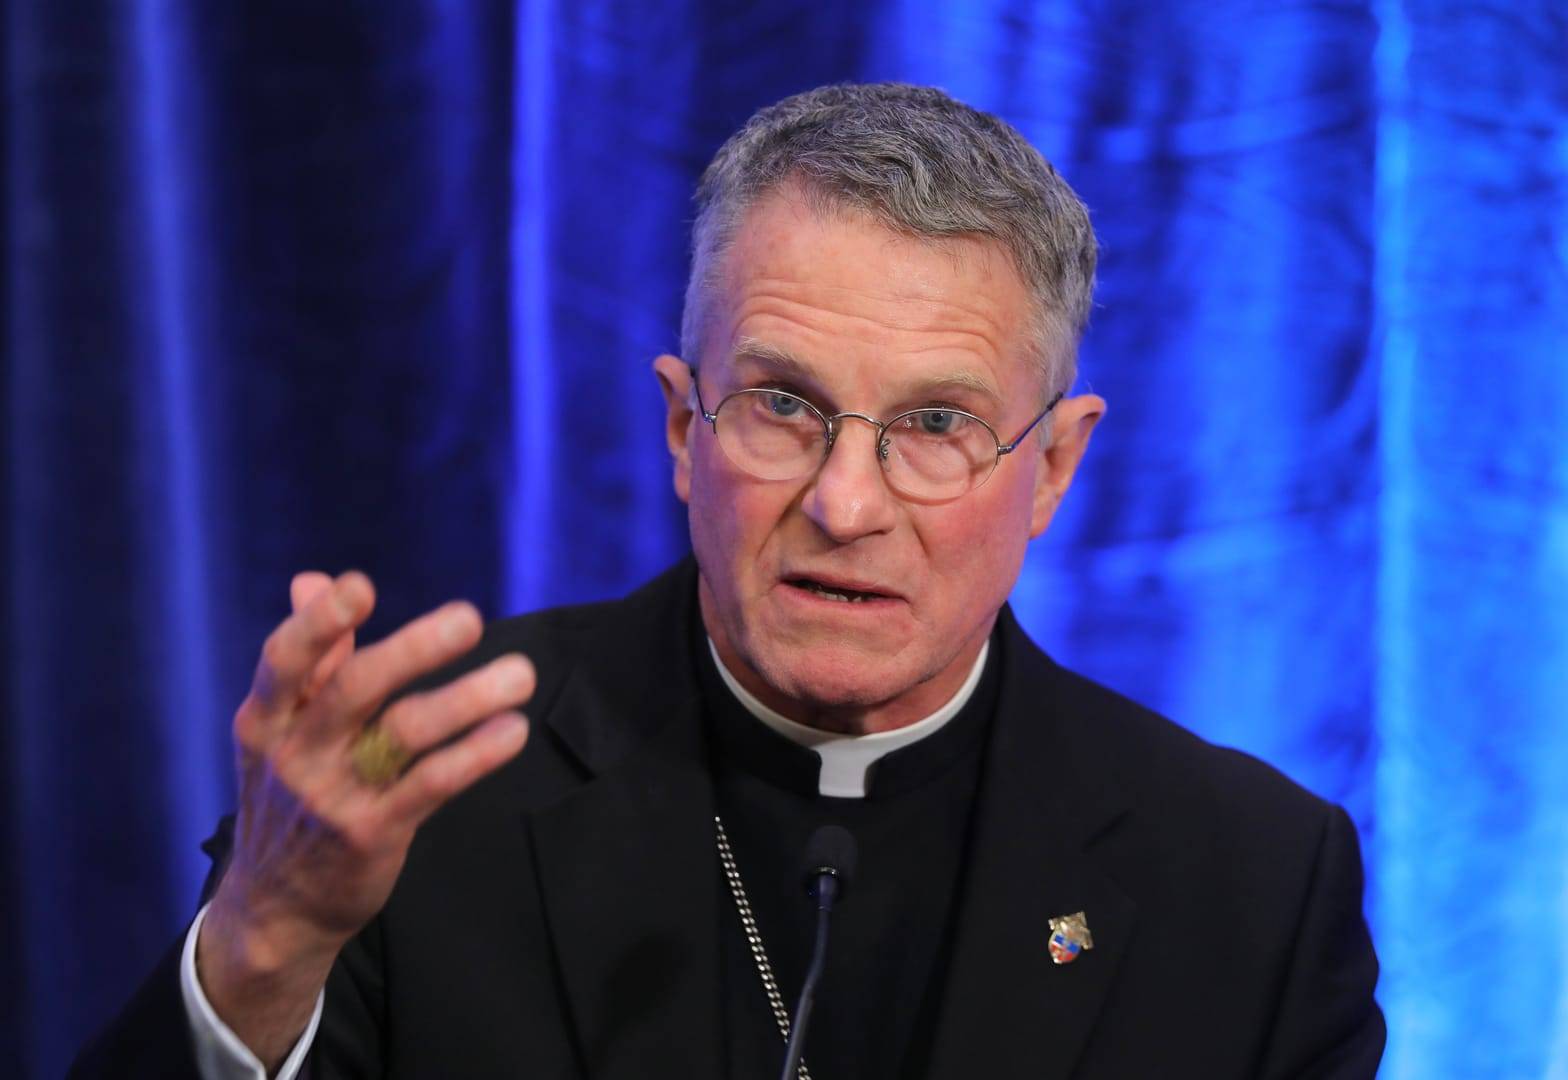 Archbishop Timothy P. Broglio of the U.S. Archdiocese for the Military Services, gestures during a Nov. 15, 2022, news conference after being elected president of the U.S. Conference of Catholic Bishops during the fall general assembly of the bishops in Baltimore. (Credit: Bob Roller/CNS.)